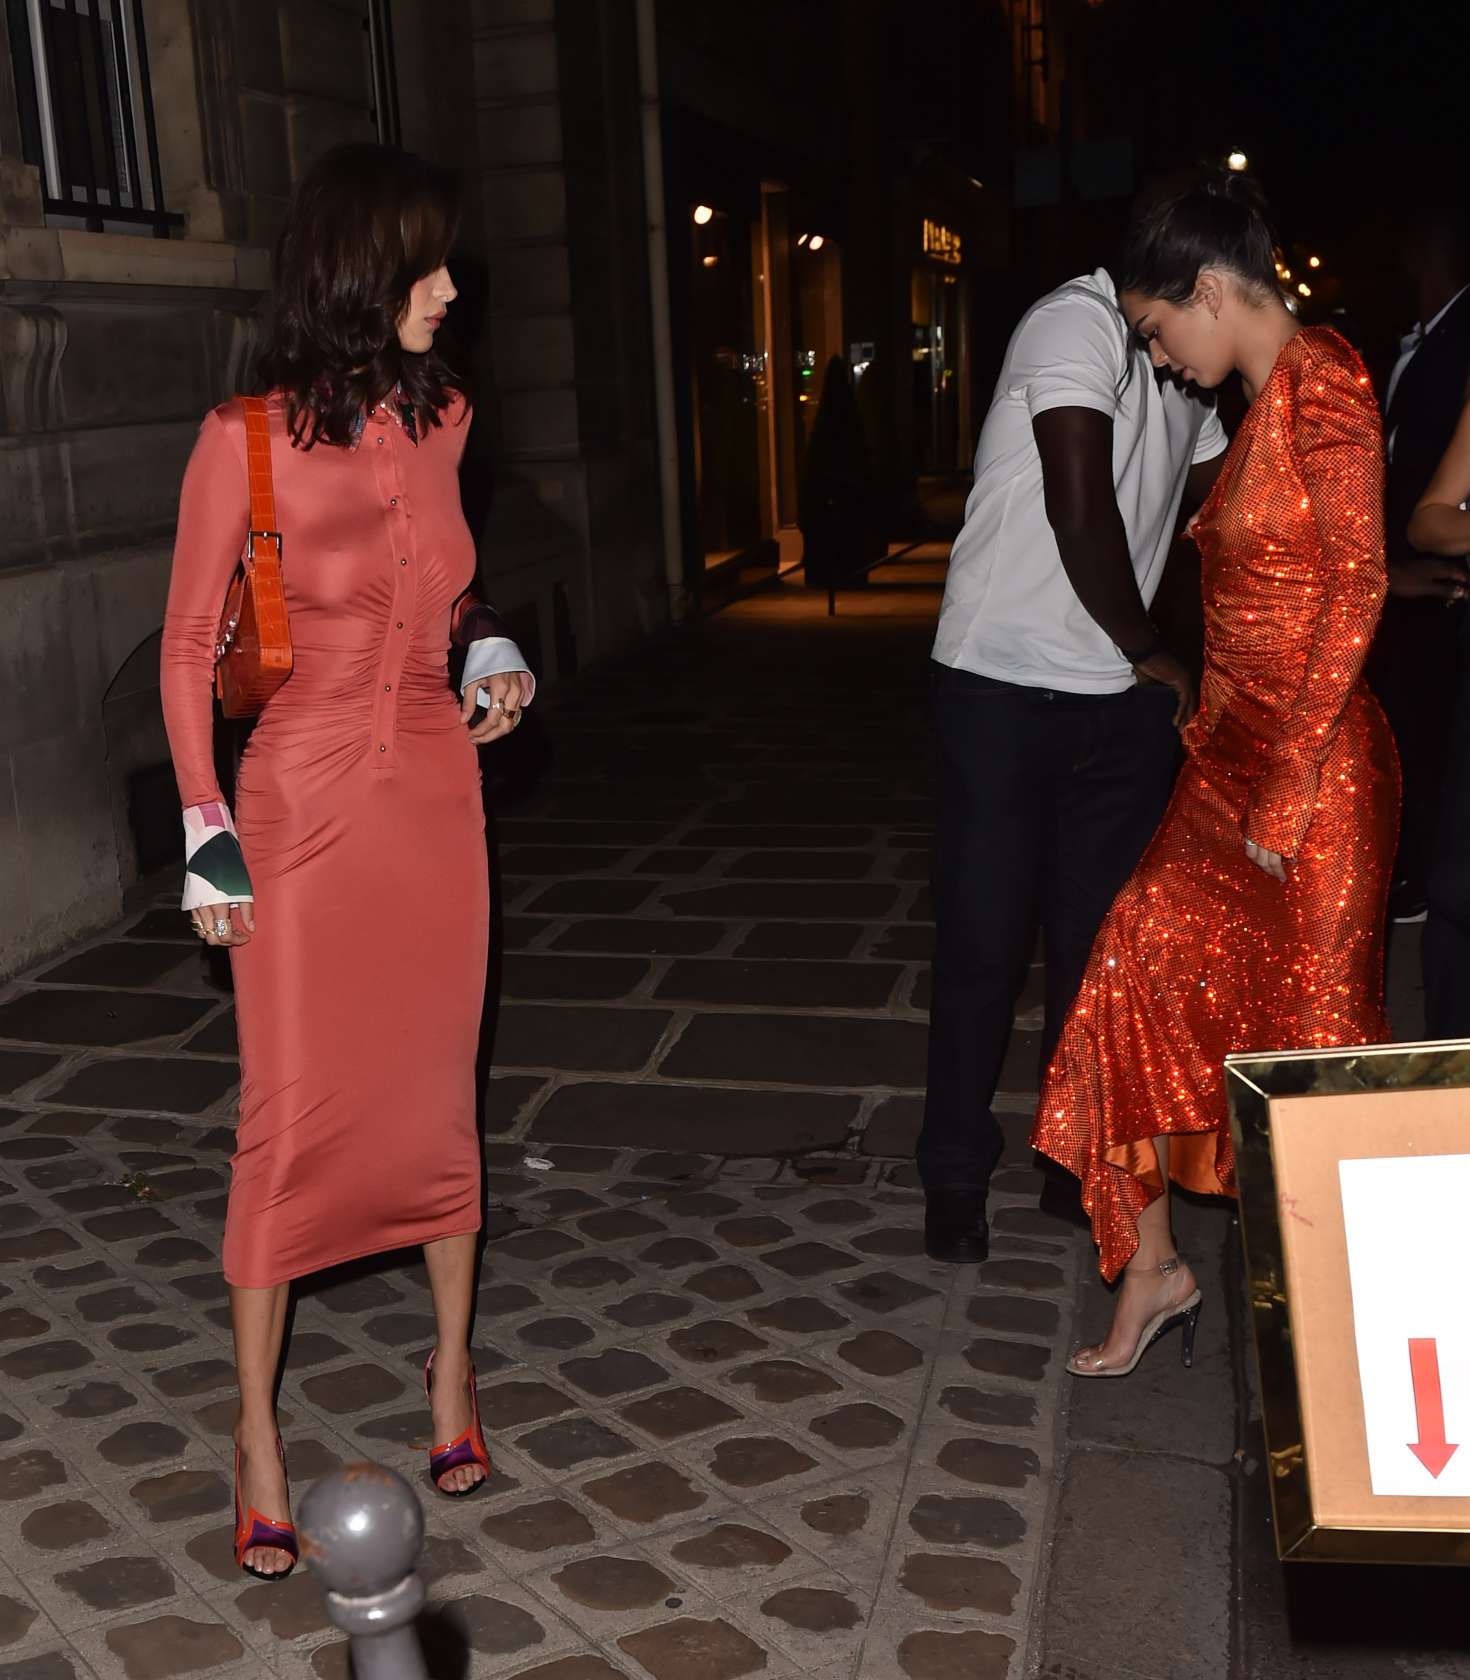 Bella Hadid and Kendall Jenner in Red Dress â€“ Leaving the George V Hotel in Paris